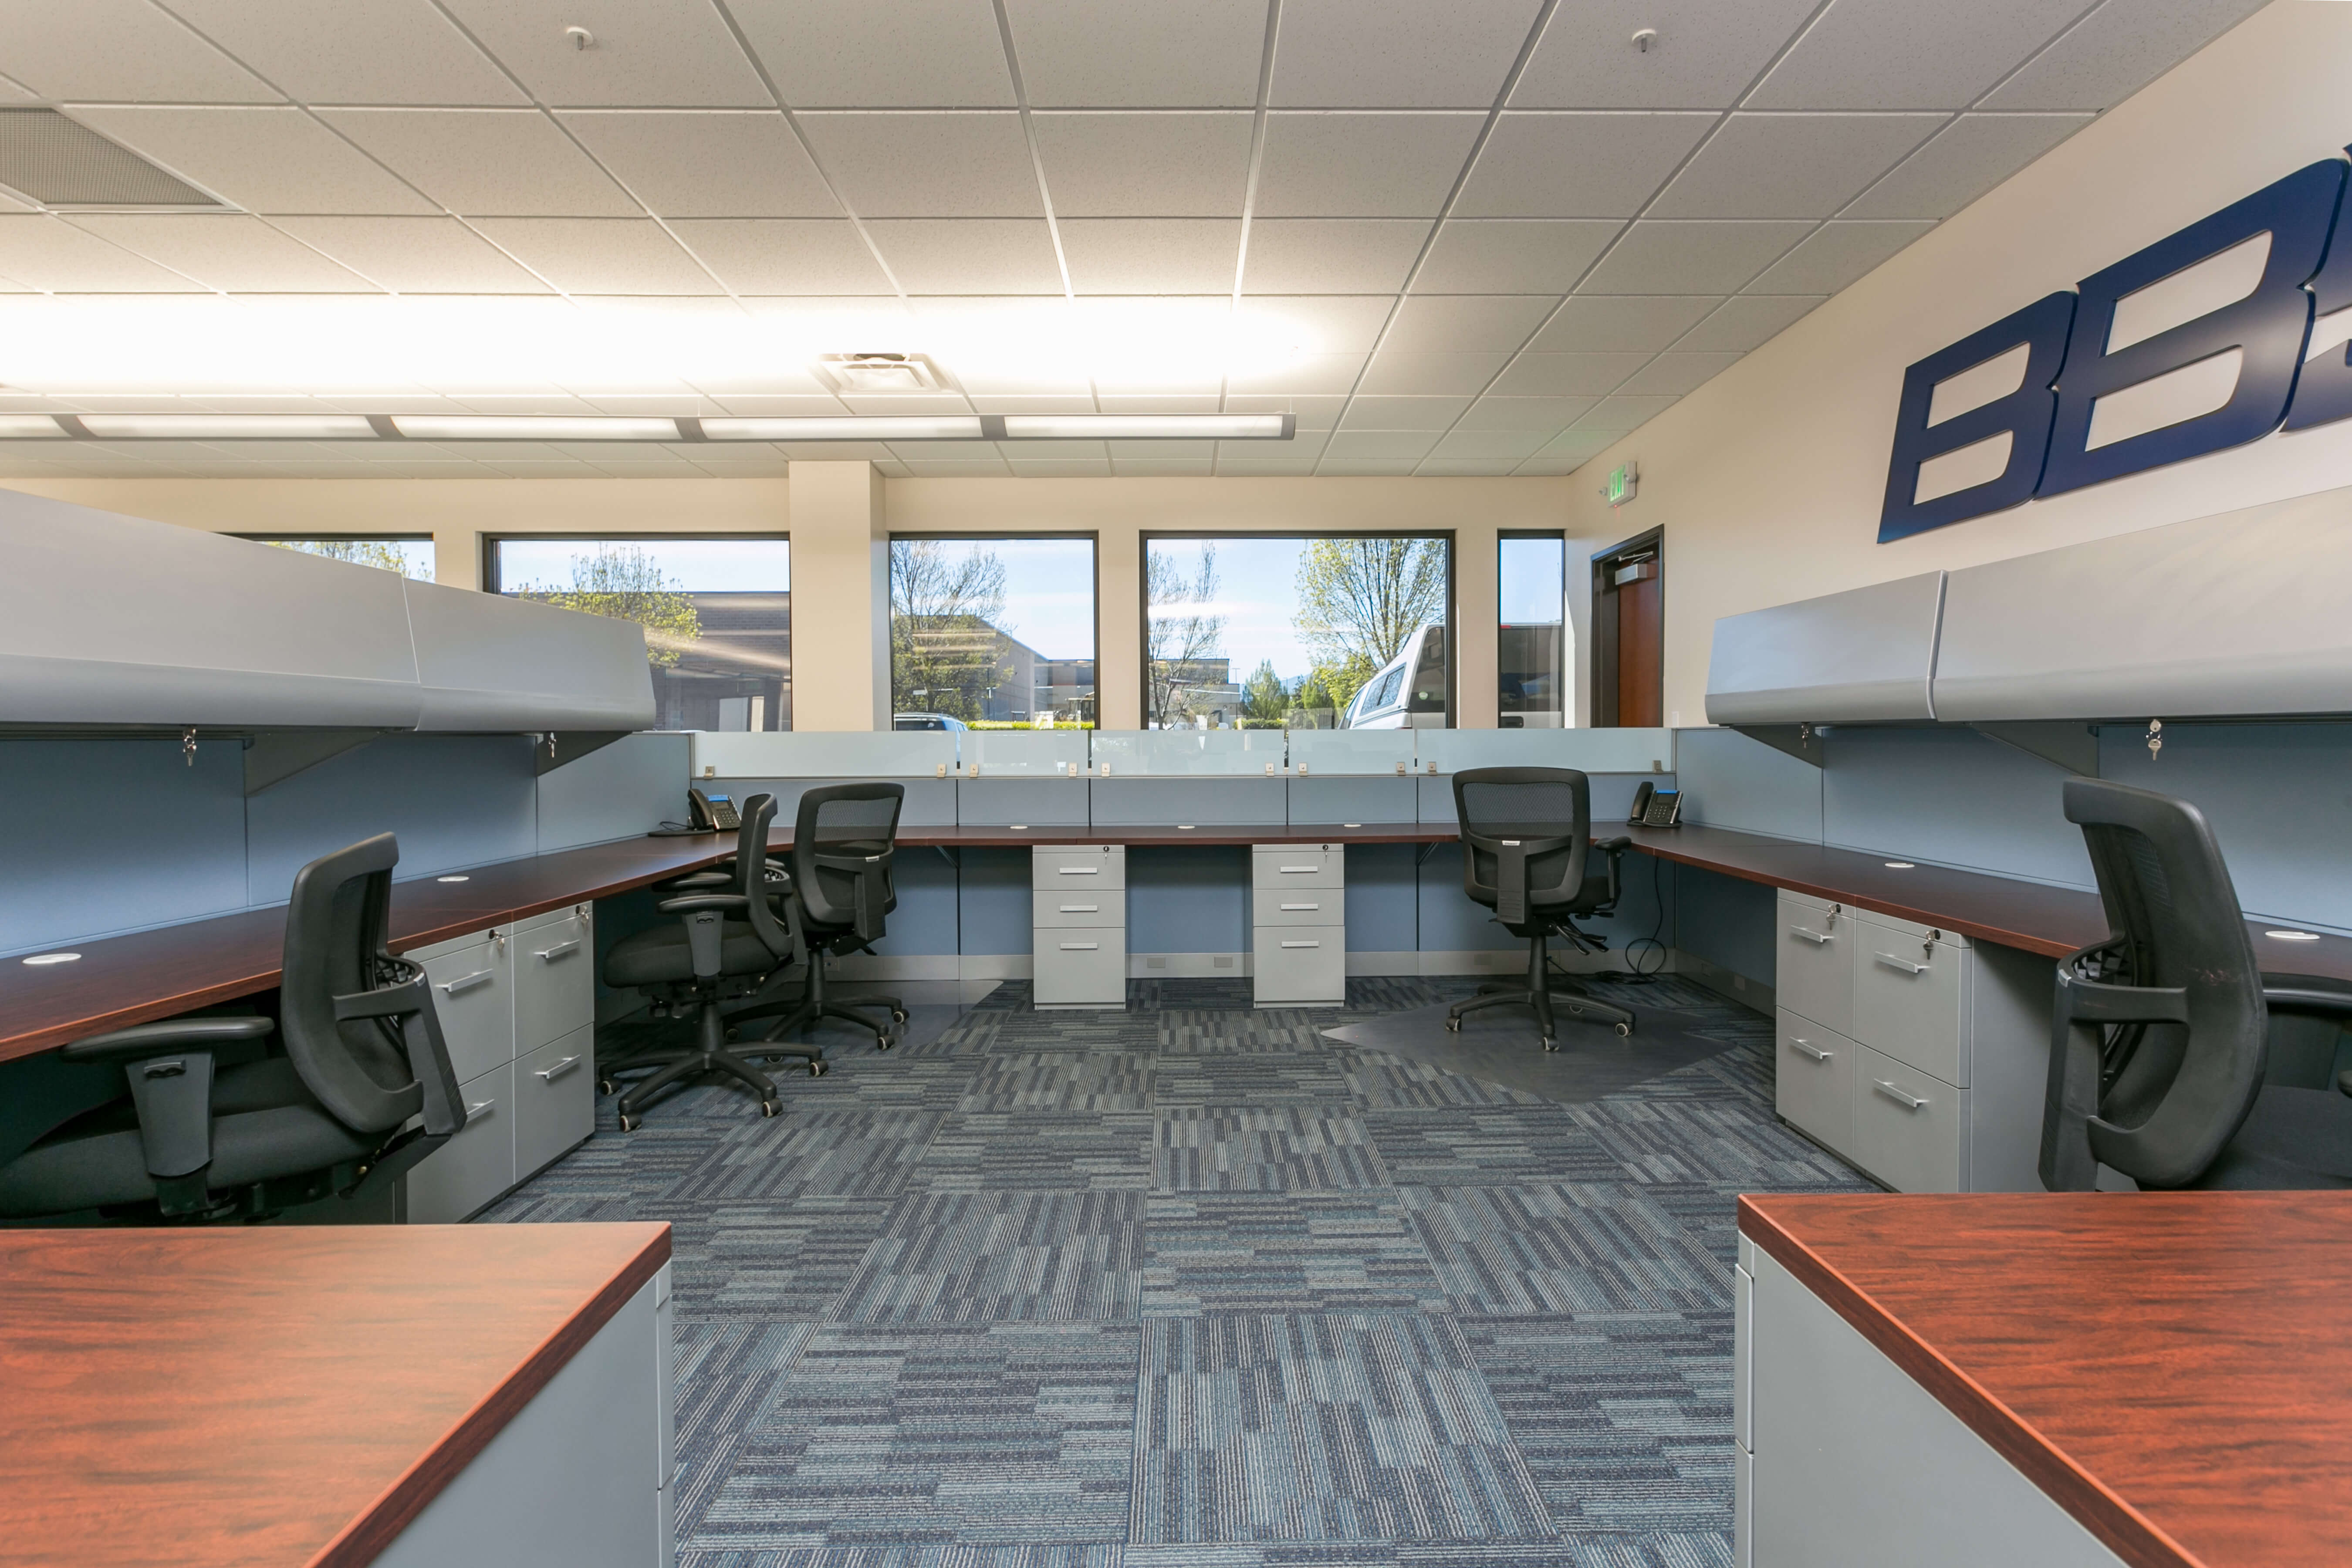 office space with tenant improvements: permanent desks installed in rows with partitions